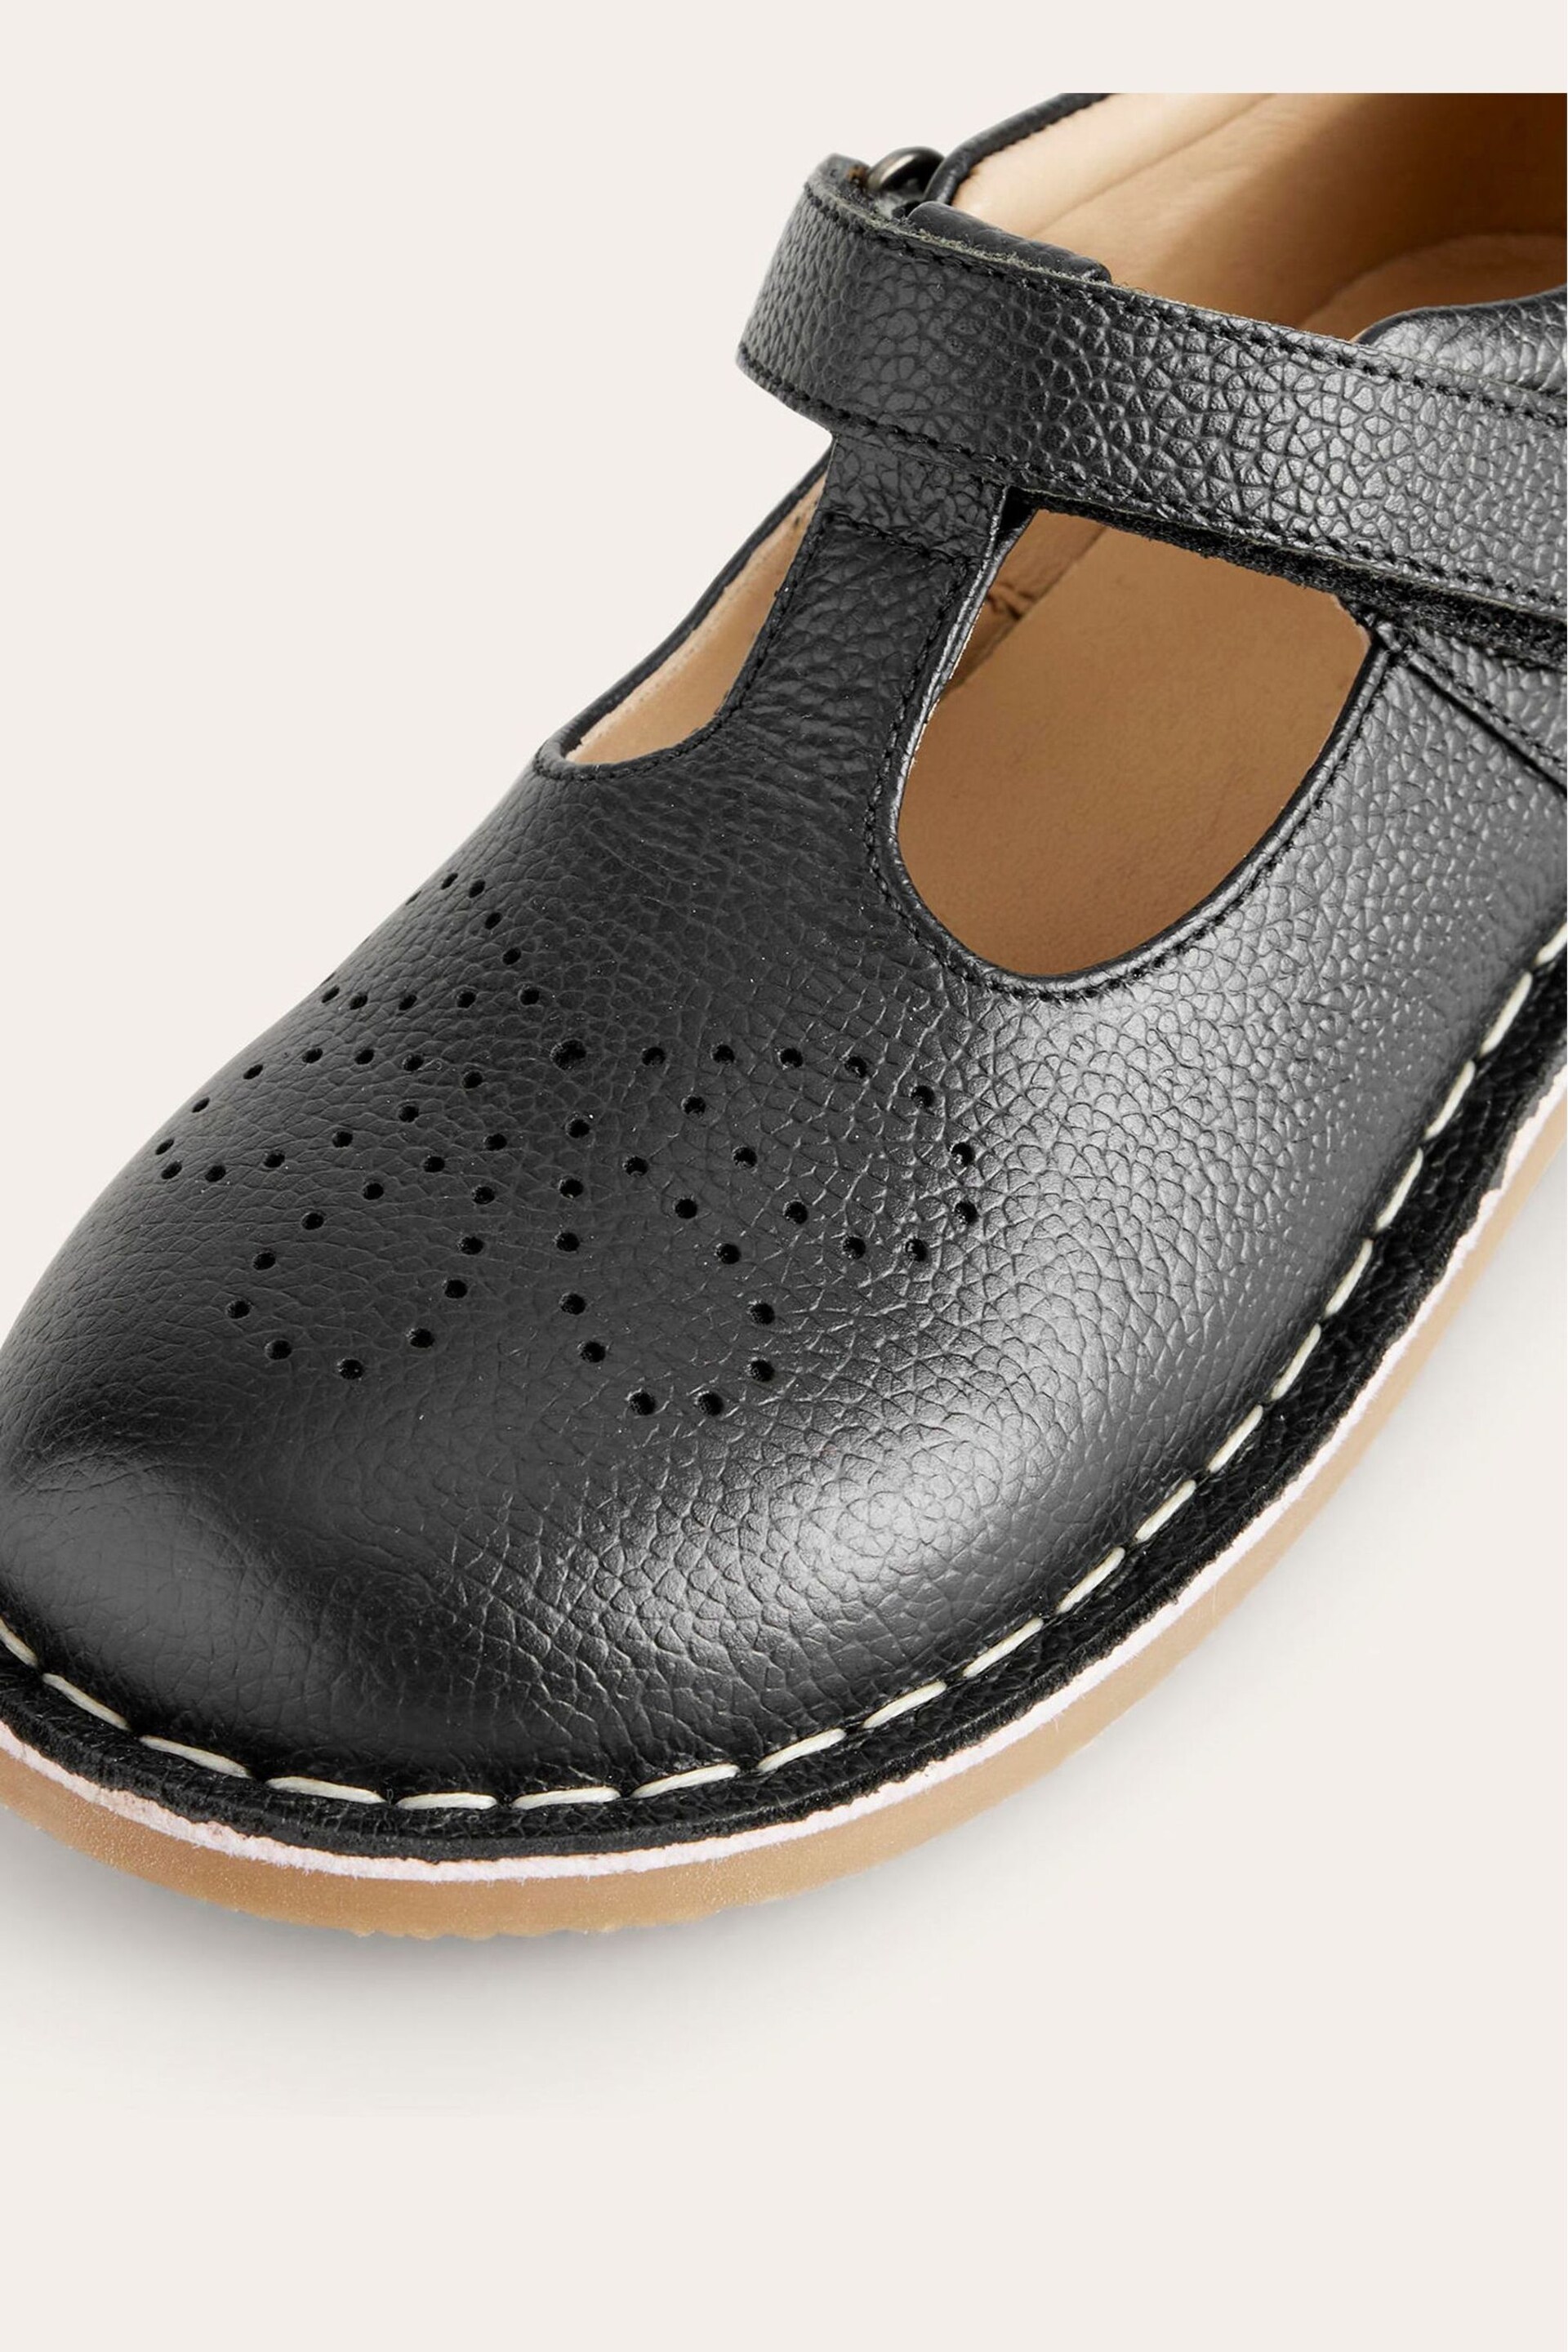 Boden Black Leather T-Bar School Shoes - Image 3 of 3